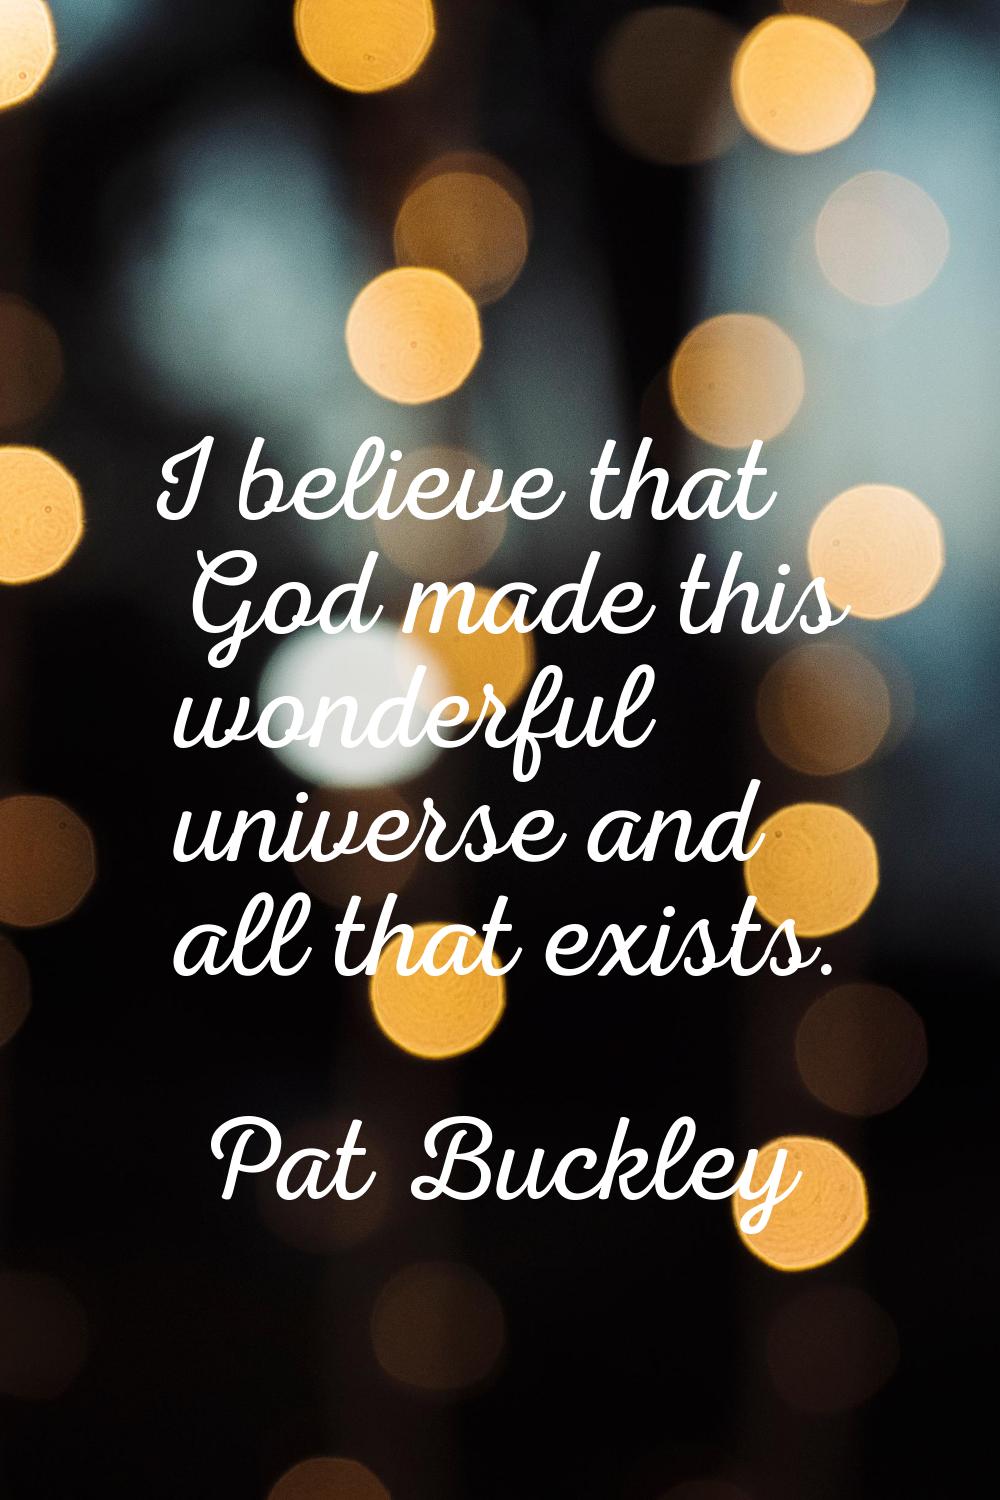 I believe that God made this wonderful universe and all that exists.